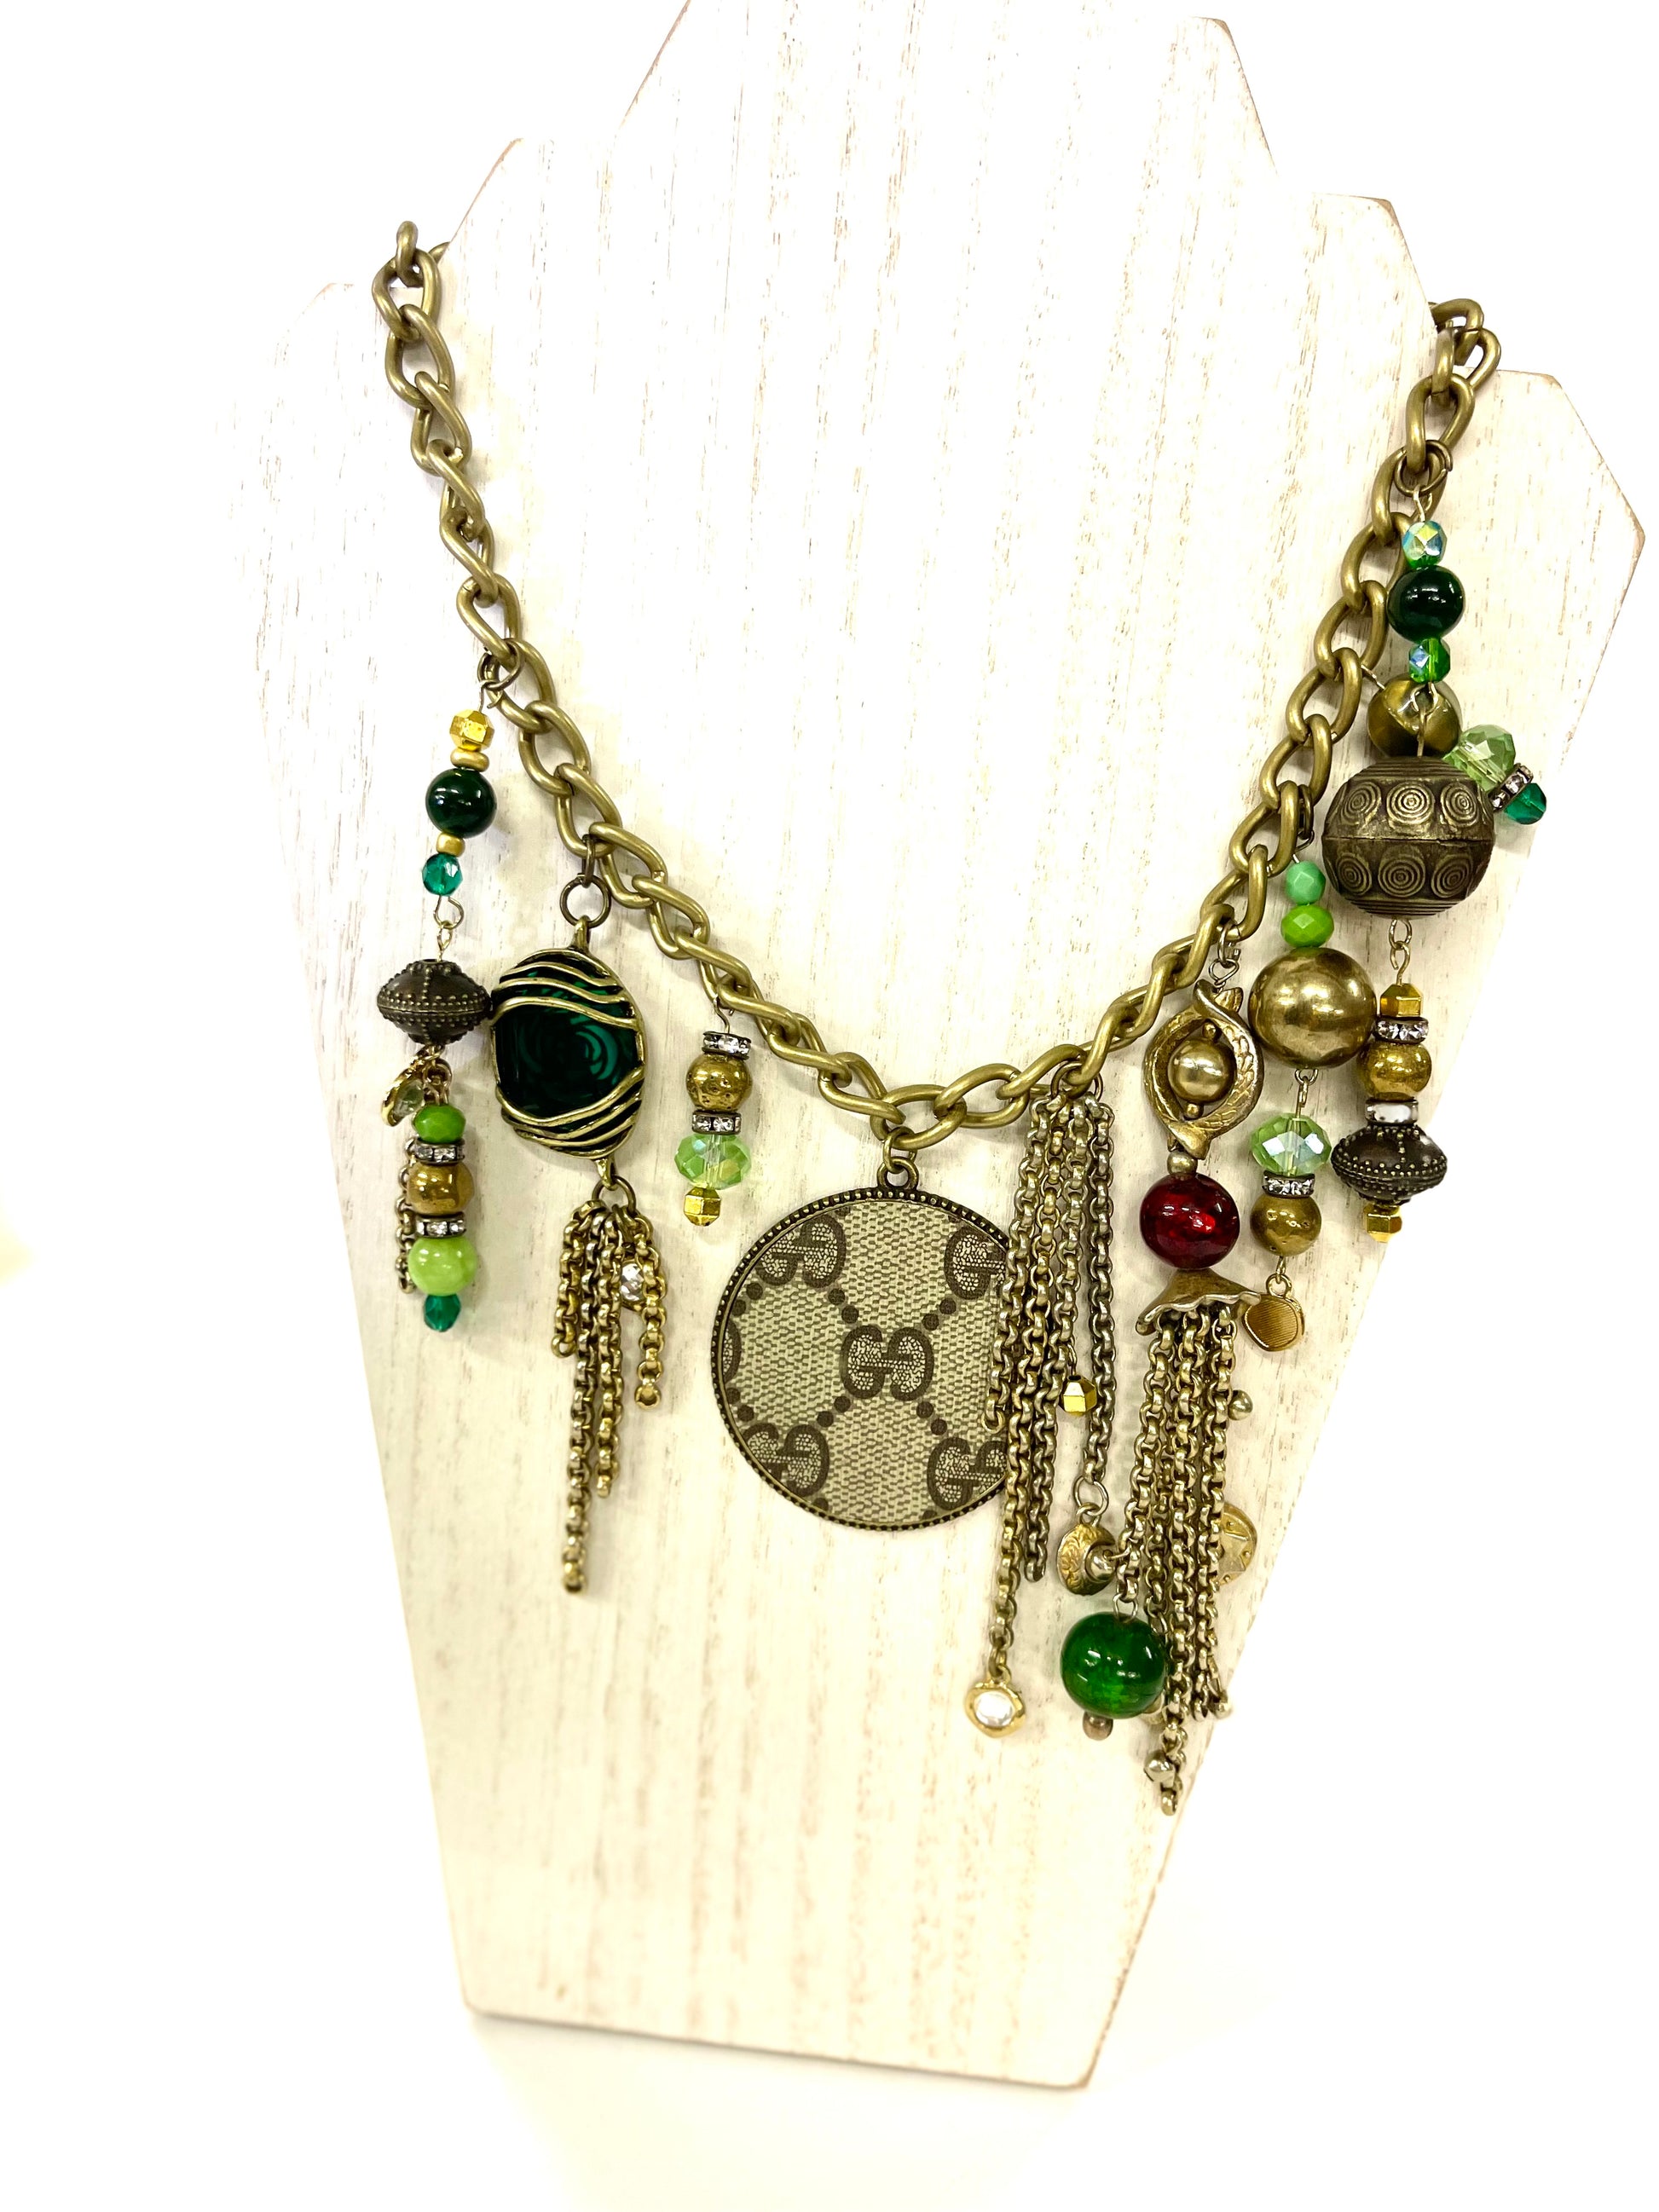 One of a kind- Antique, short chain necklace 18” round -Upcycled from estate findings - Patches Of Upcycling